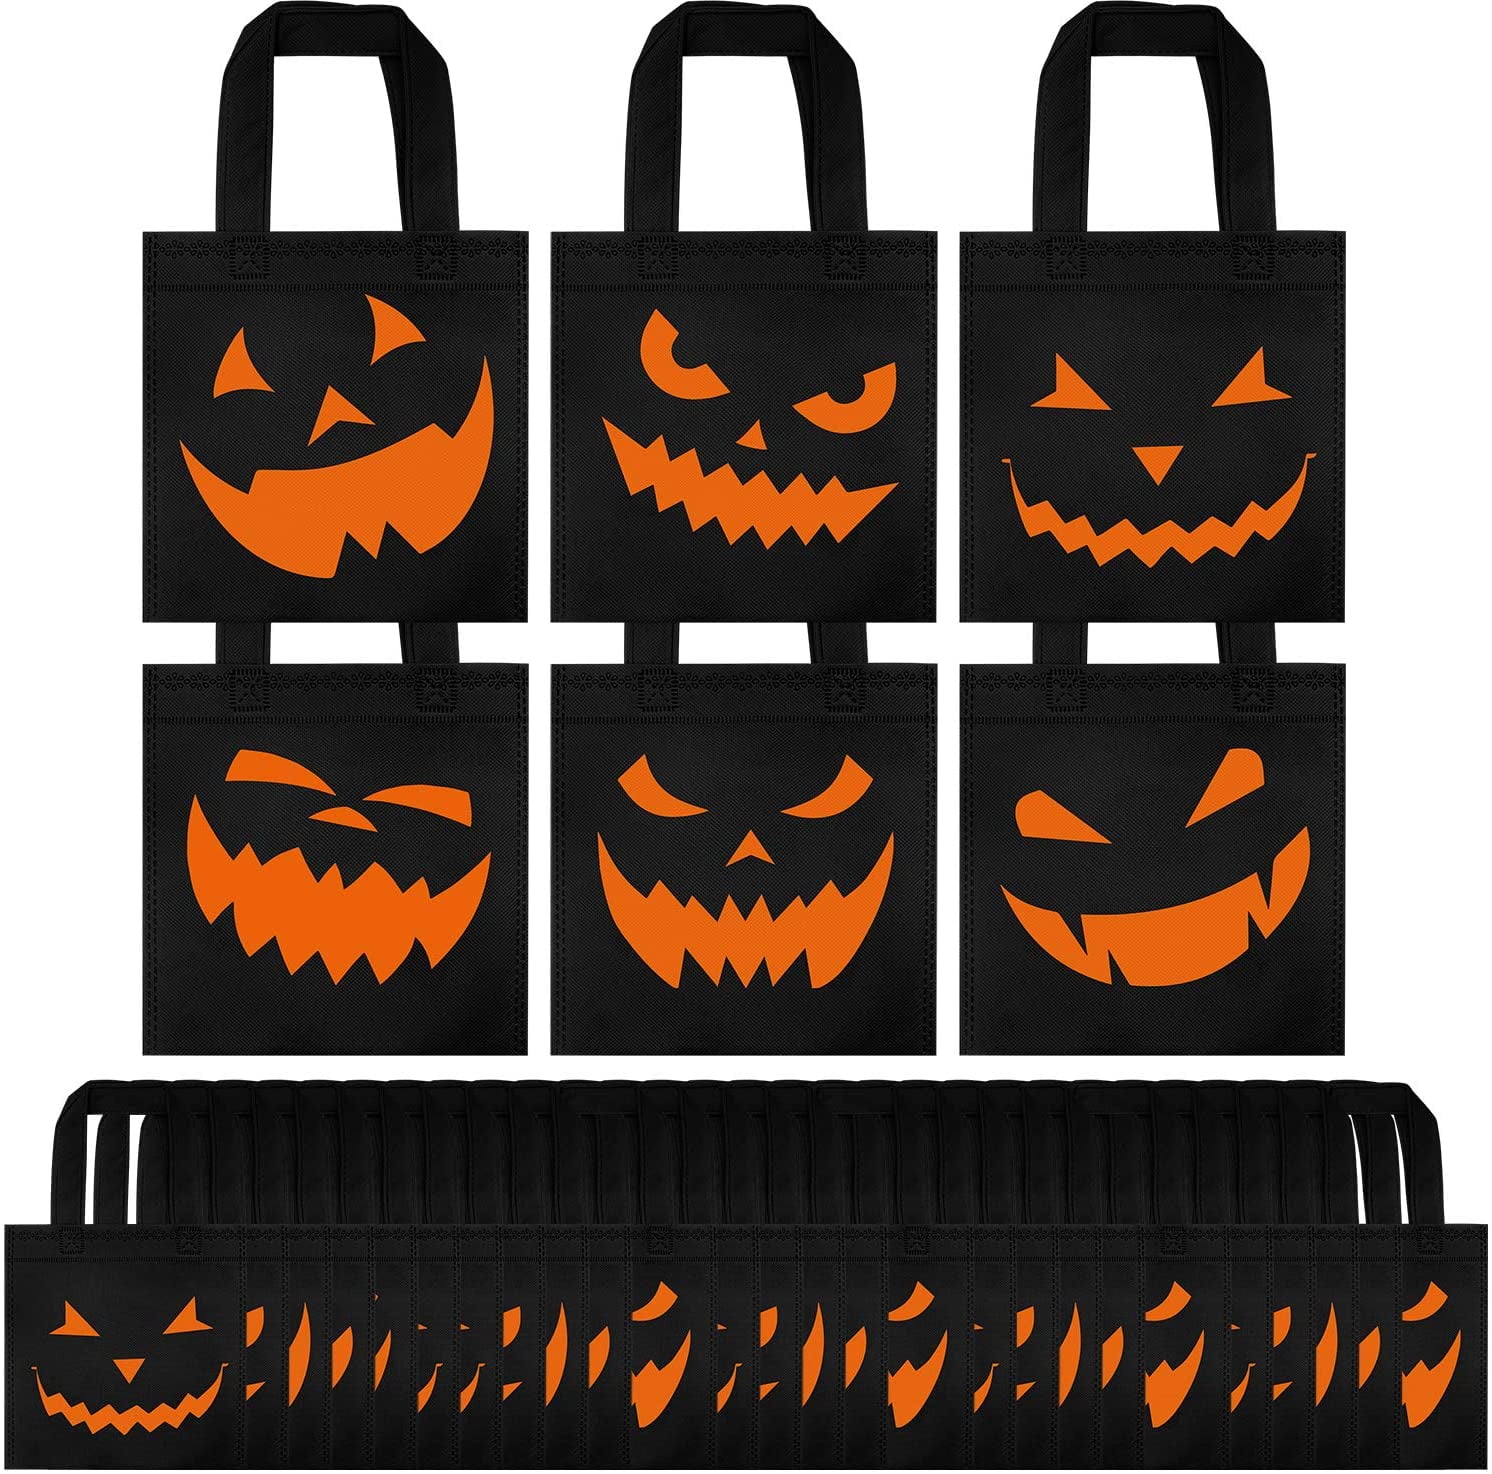 Halloween tie dyed party favors trick or treat favor bags Candy bags Halloween favor bags reusable pumpkin bags hand sewn candy goodie bags